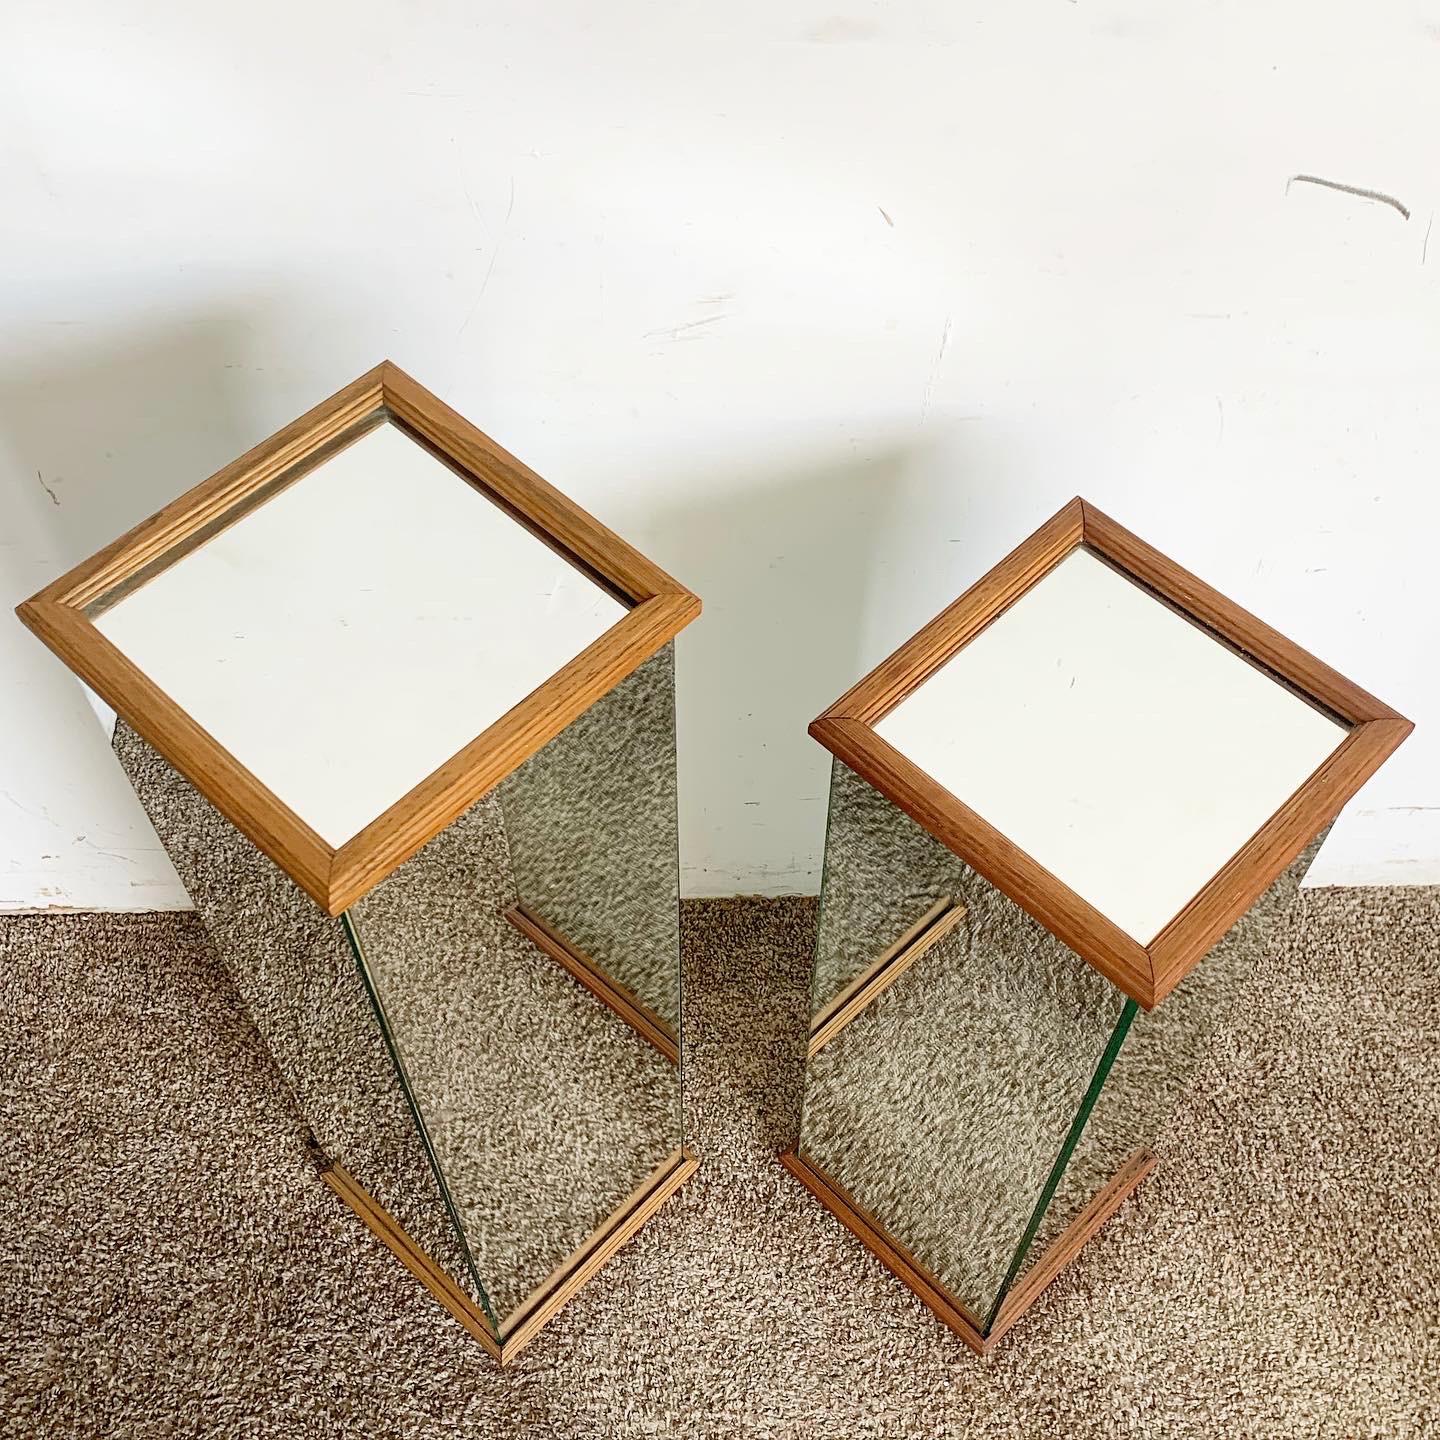 Postmodern Rectangular Prism With Wooden Trim Pedestal Side Tables - a Pair In Good Condition For Sale In Delray Beach, FL